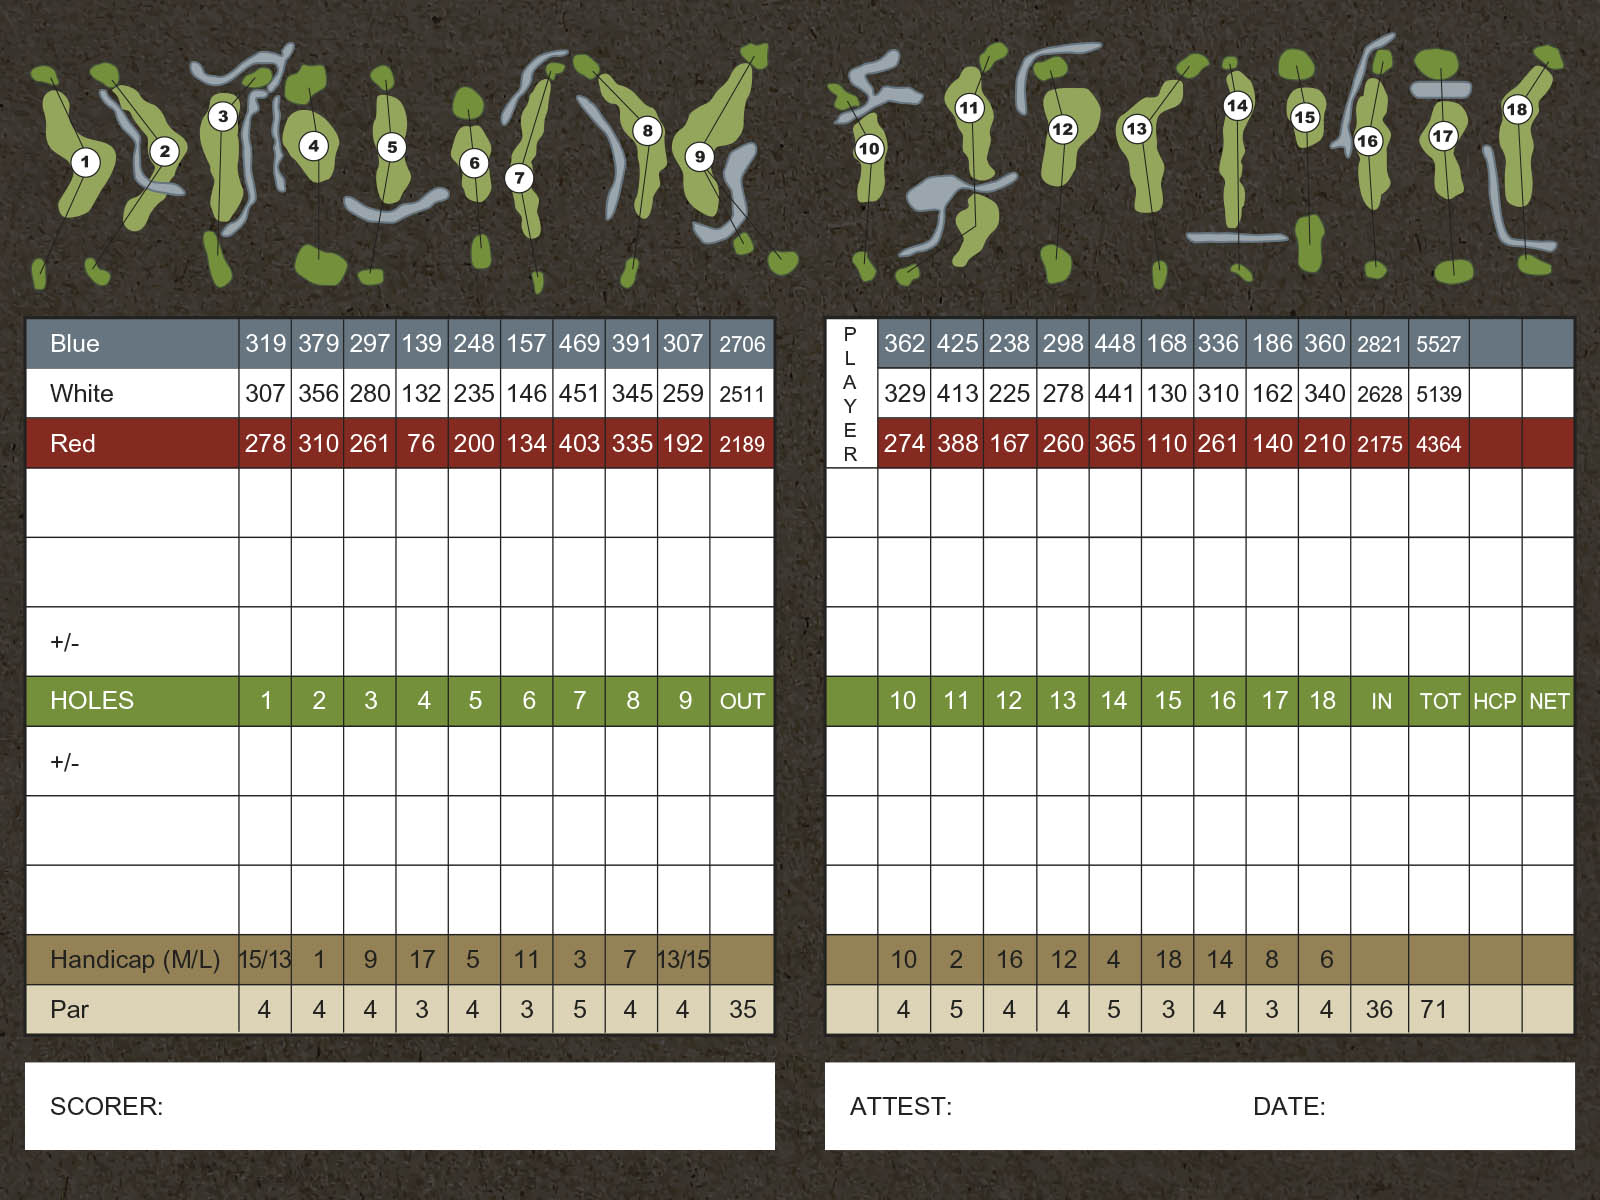 This is an image of Brant Valley Golf Club's scorecard. For those who are visually impaired, please call 1-888-833-8787 for a representative to verbally guide you through the scorecard details.